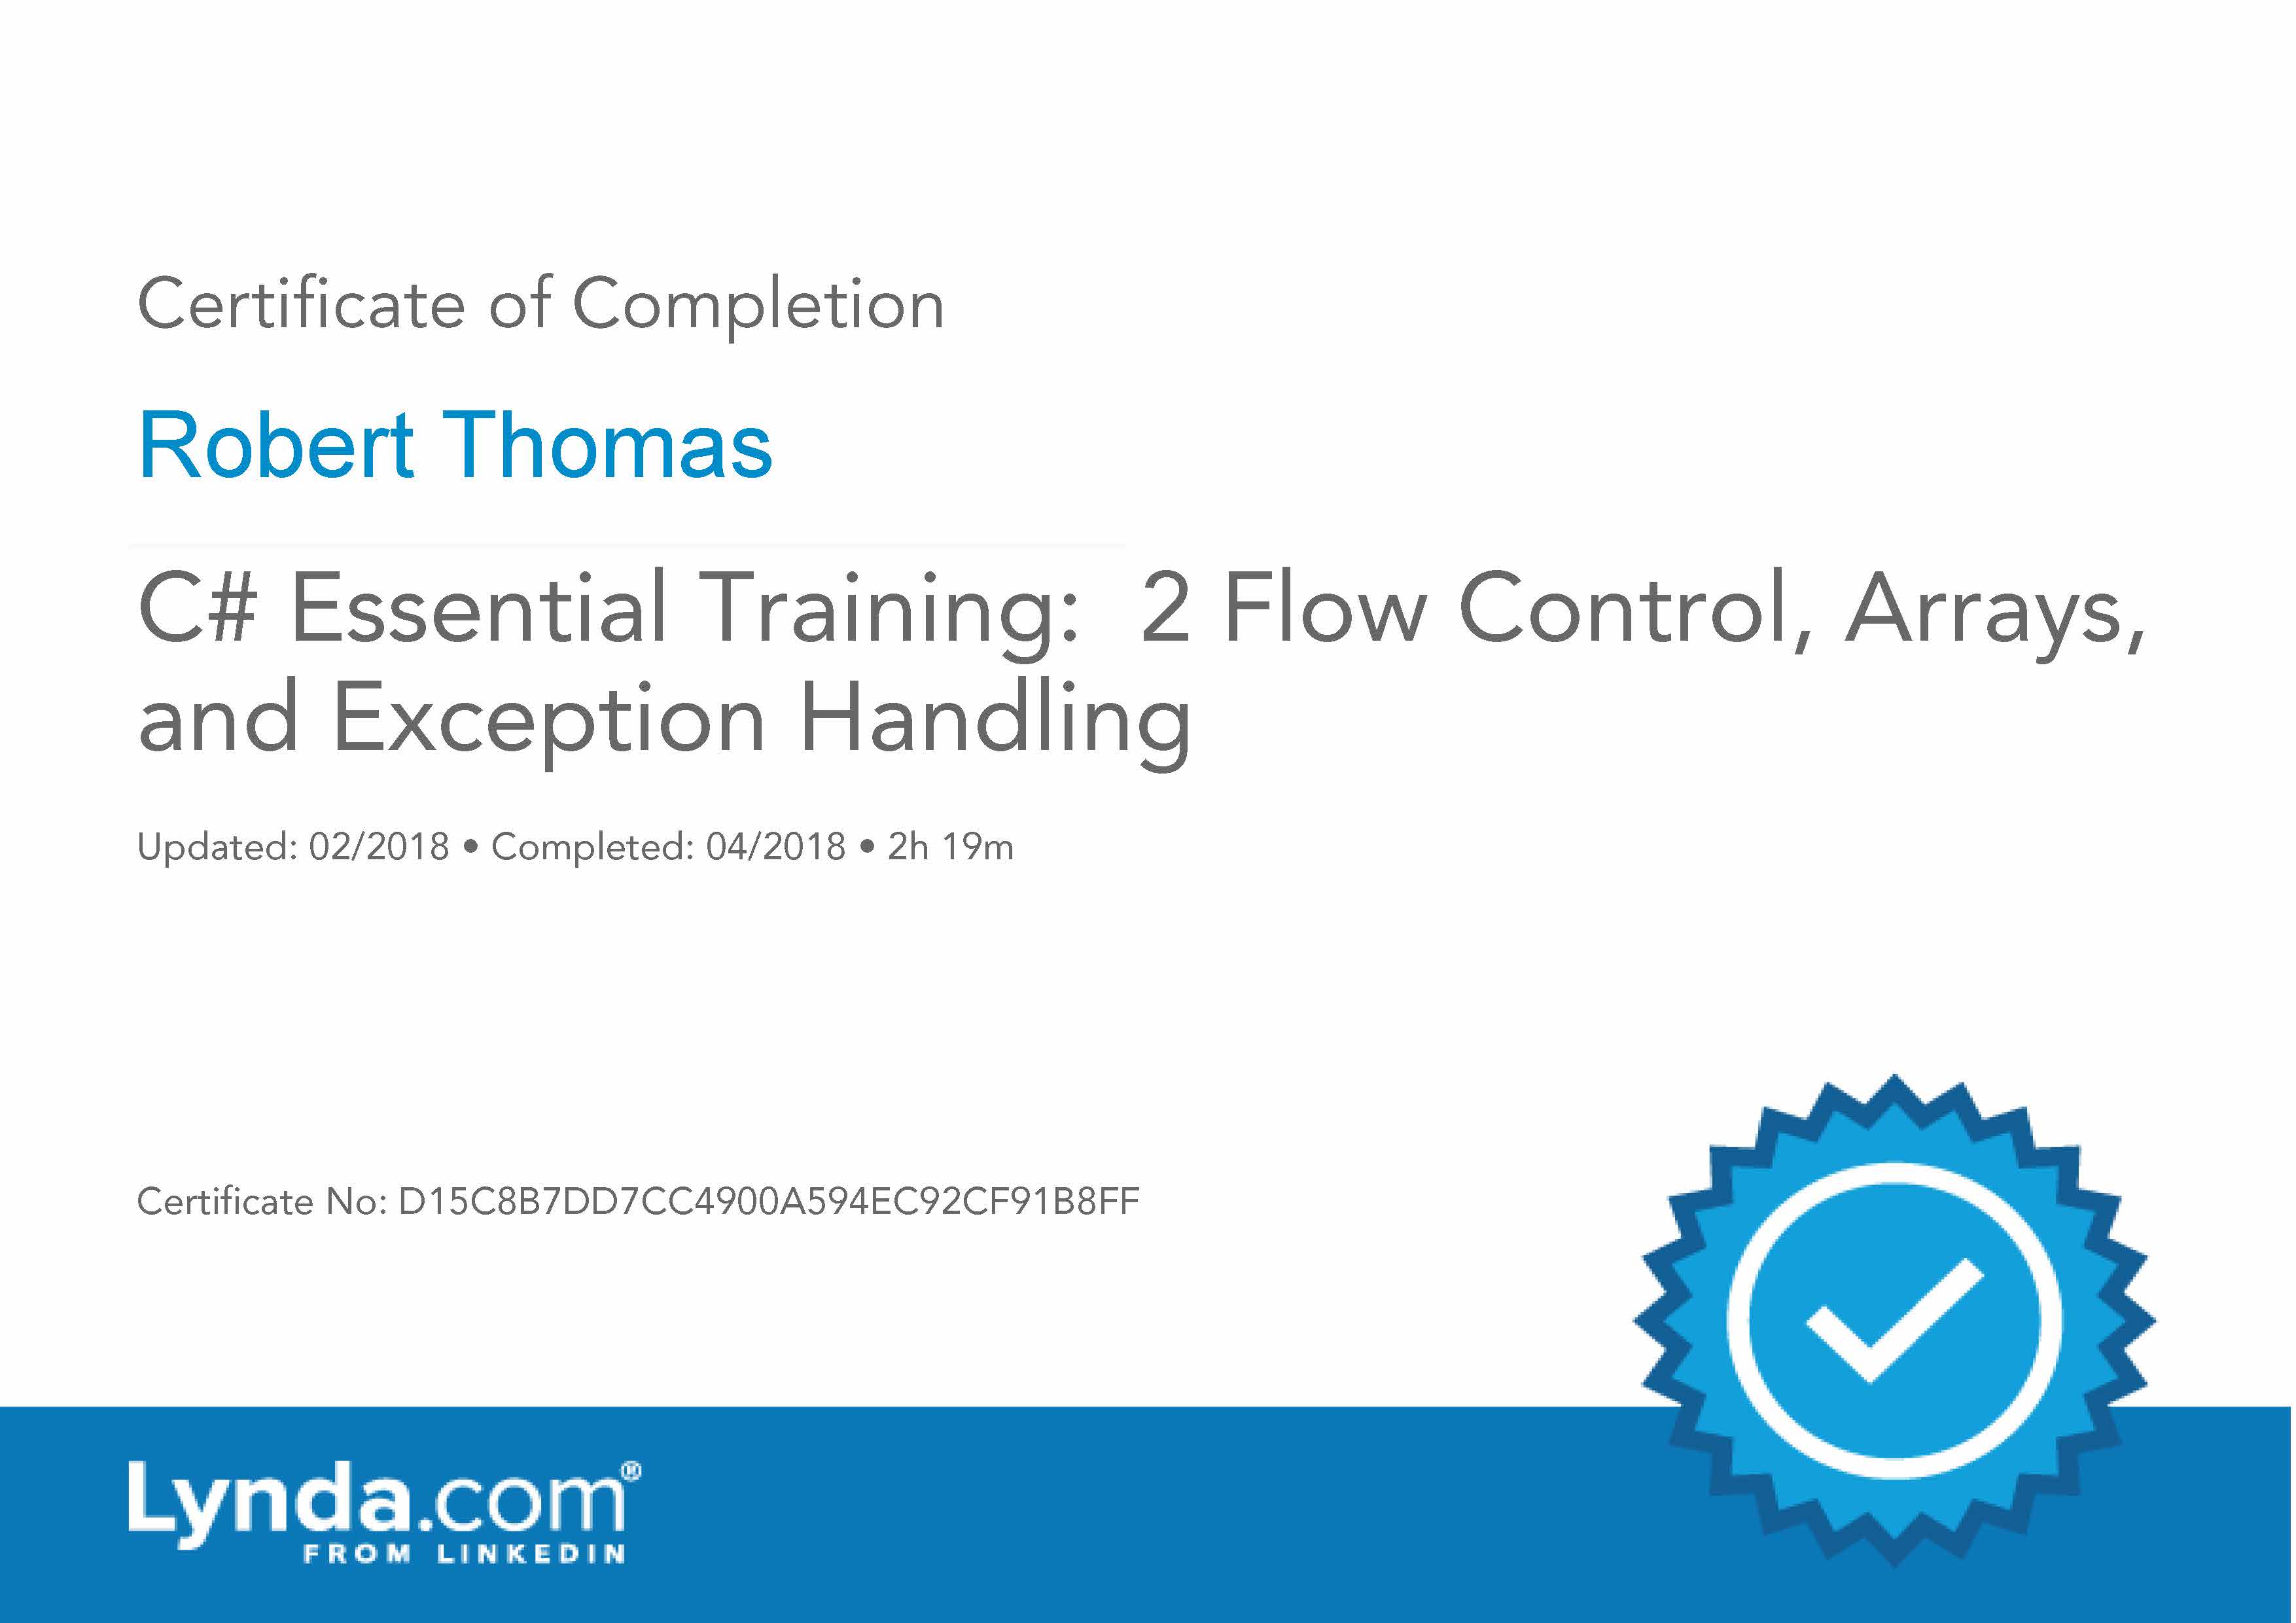 C# Essential Training - 2 - Flow Control Arrays and Exception Handling - Certificate Of Completion